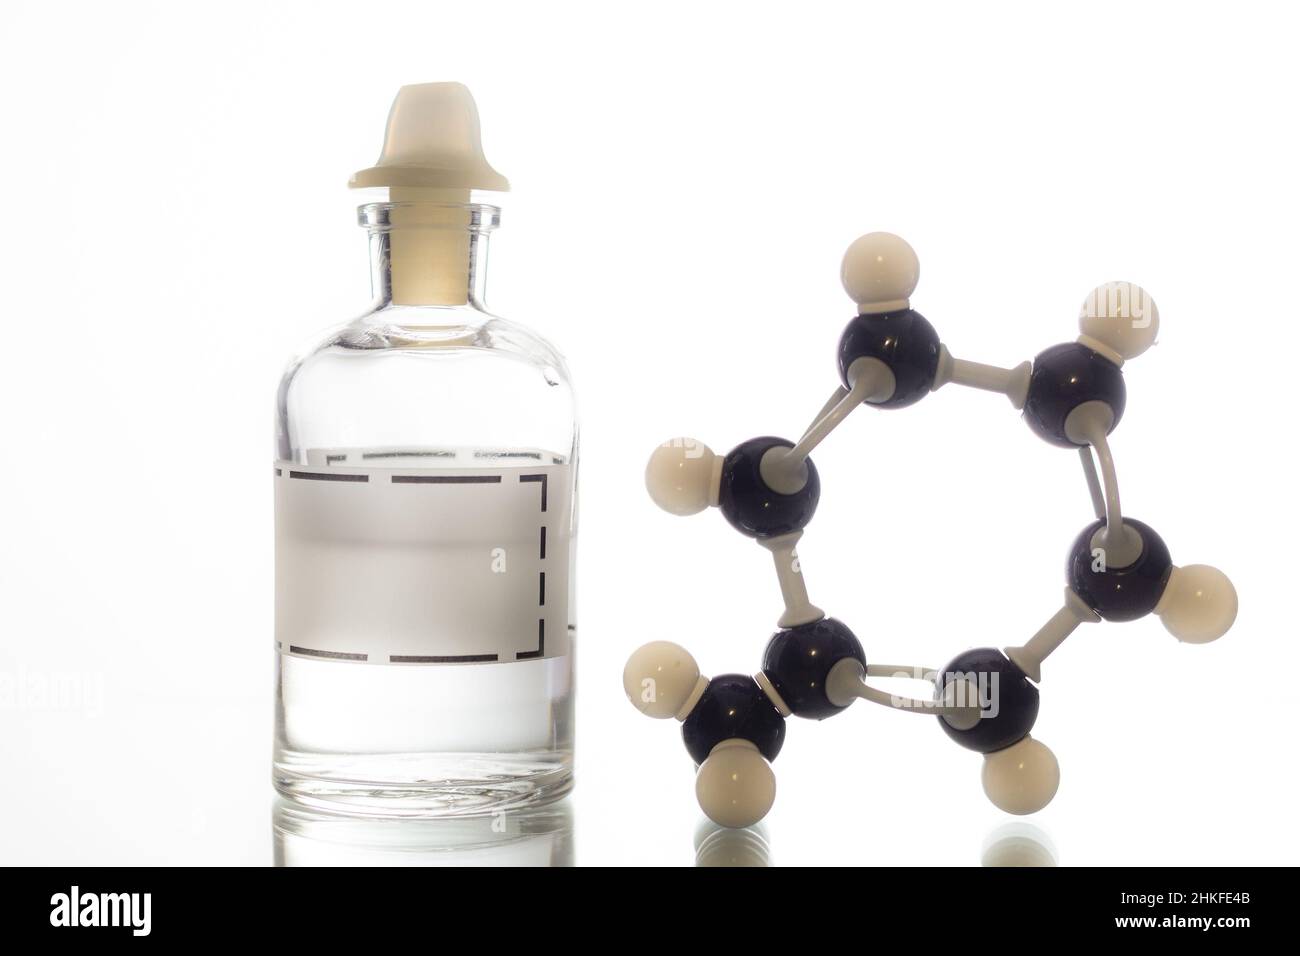 A reagent bottle containing toluene and its chemical structure. Stock Photo